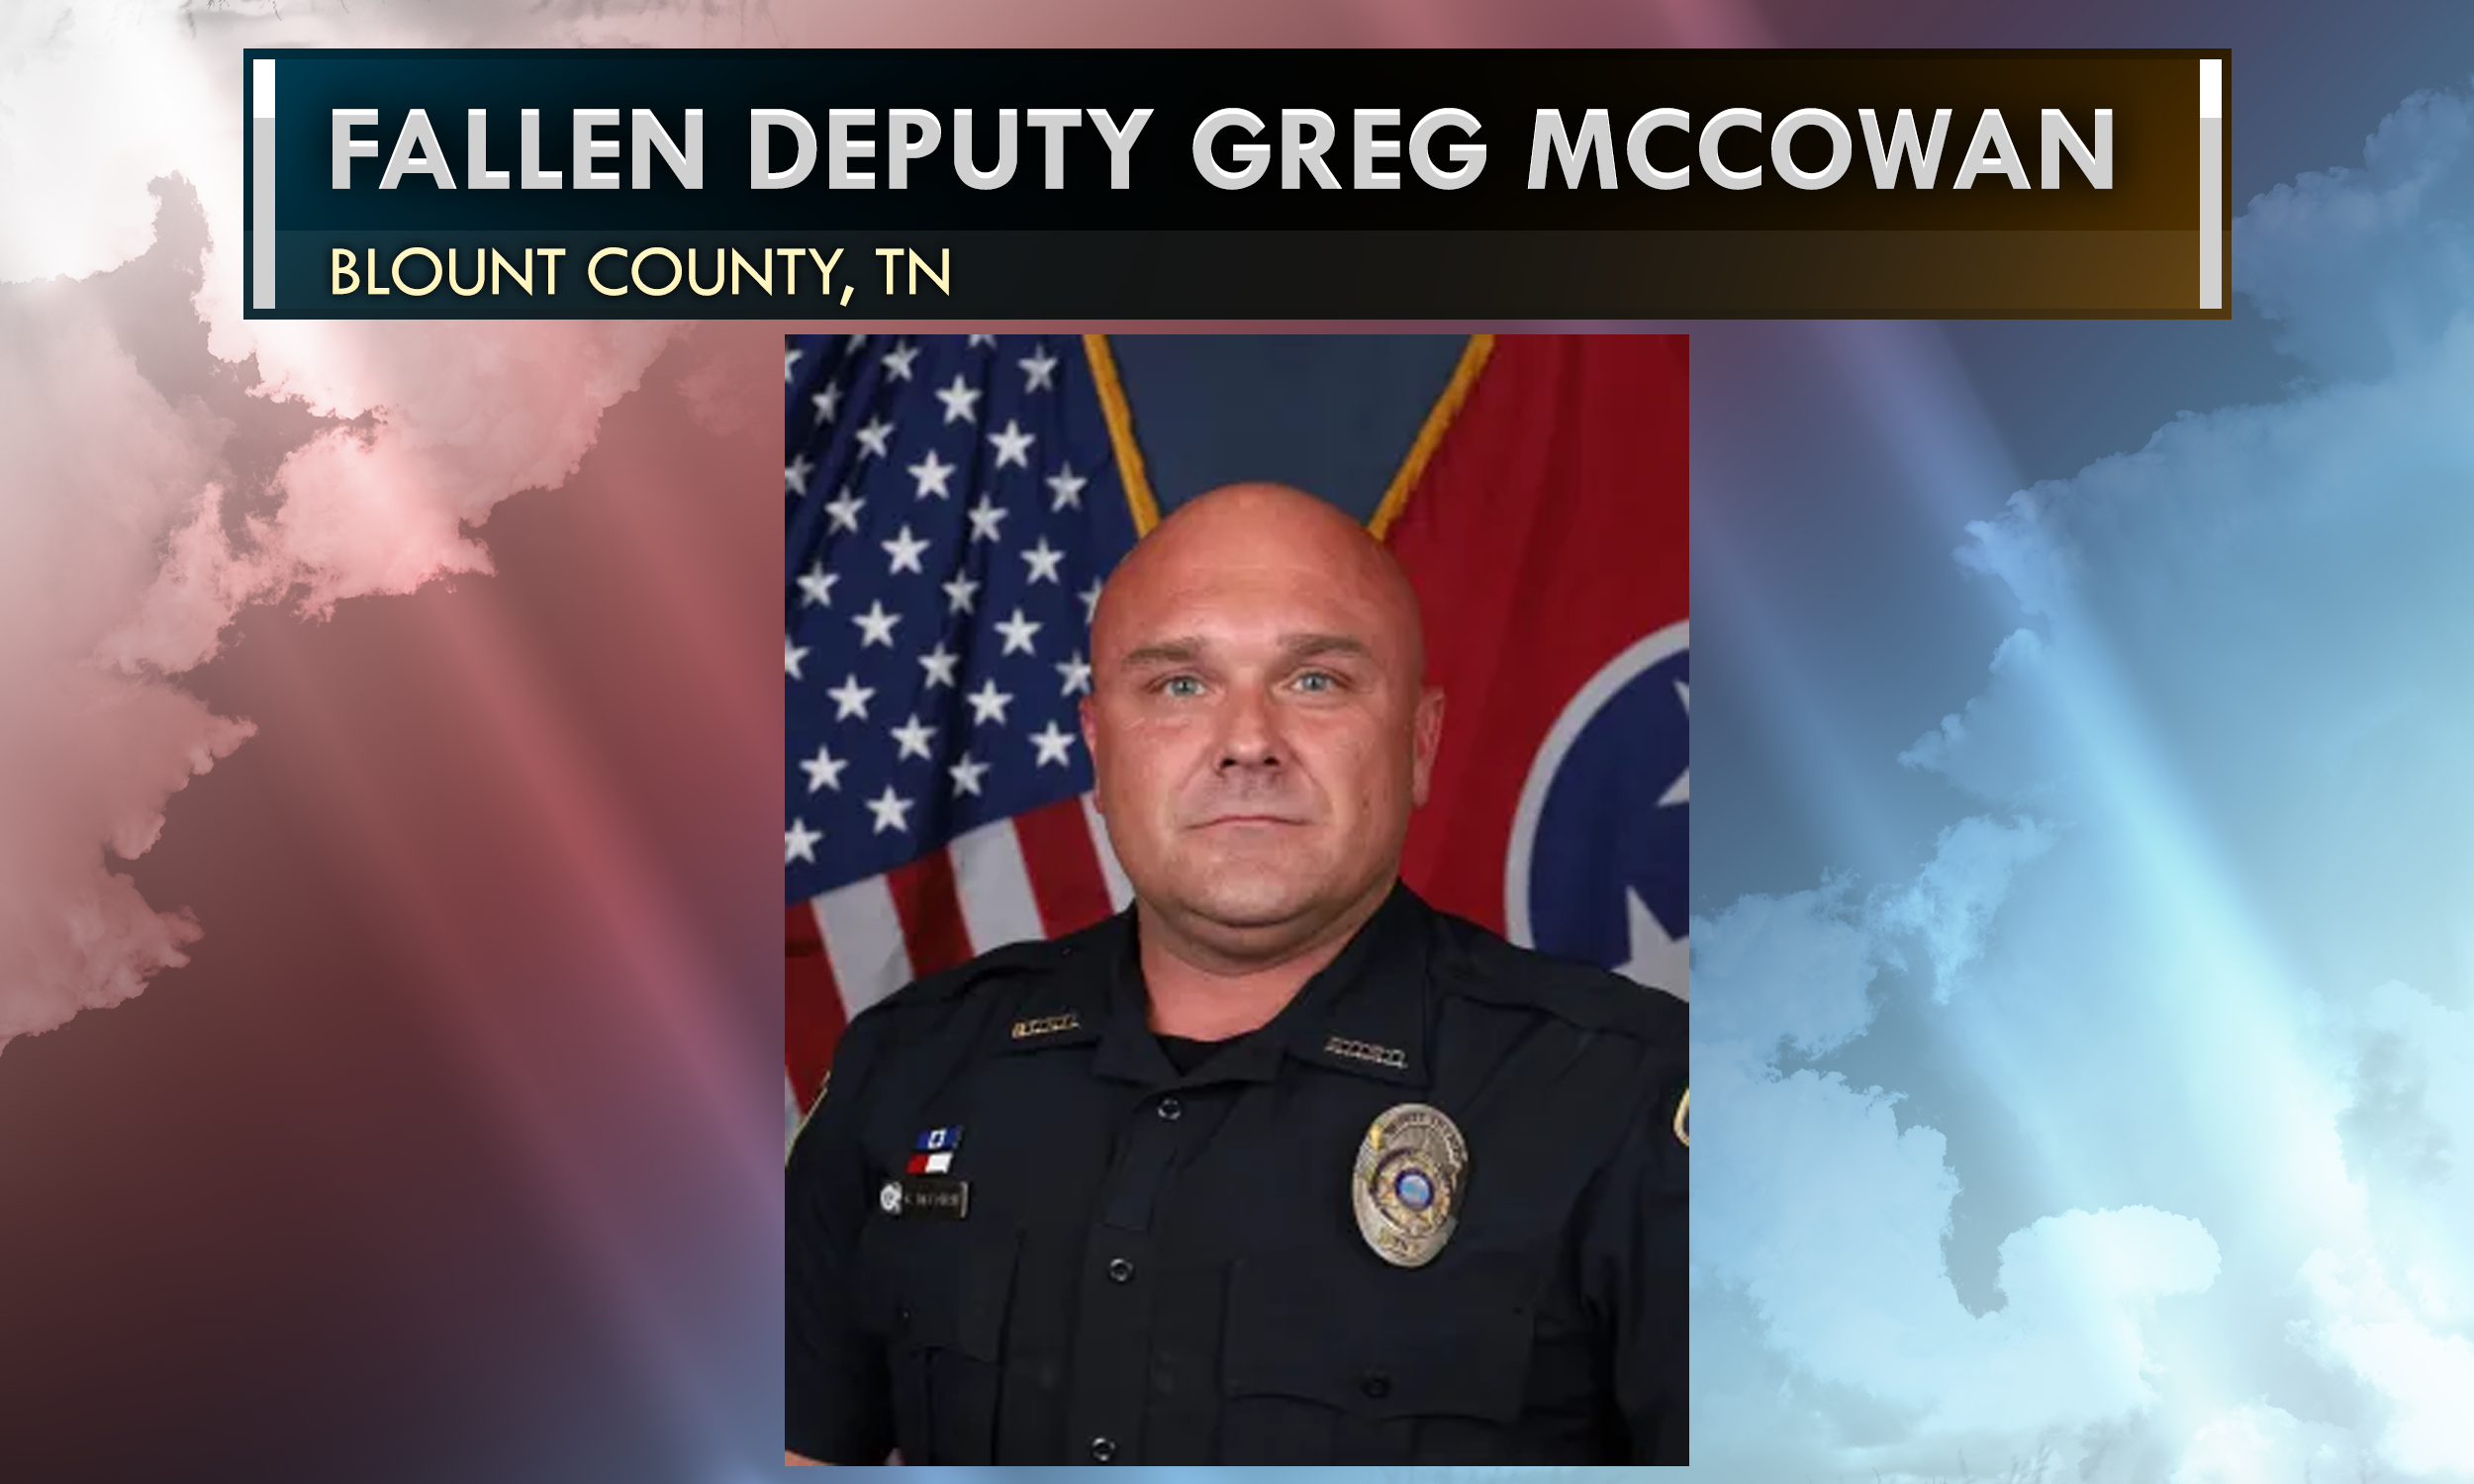 Fund Set Up to Support Family of Slain Blount County Deputy Greg McCowan